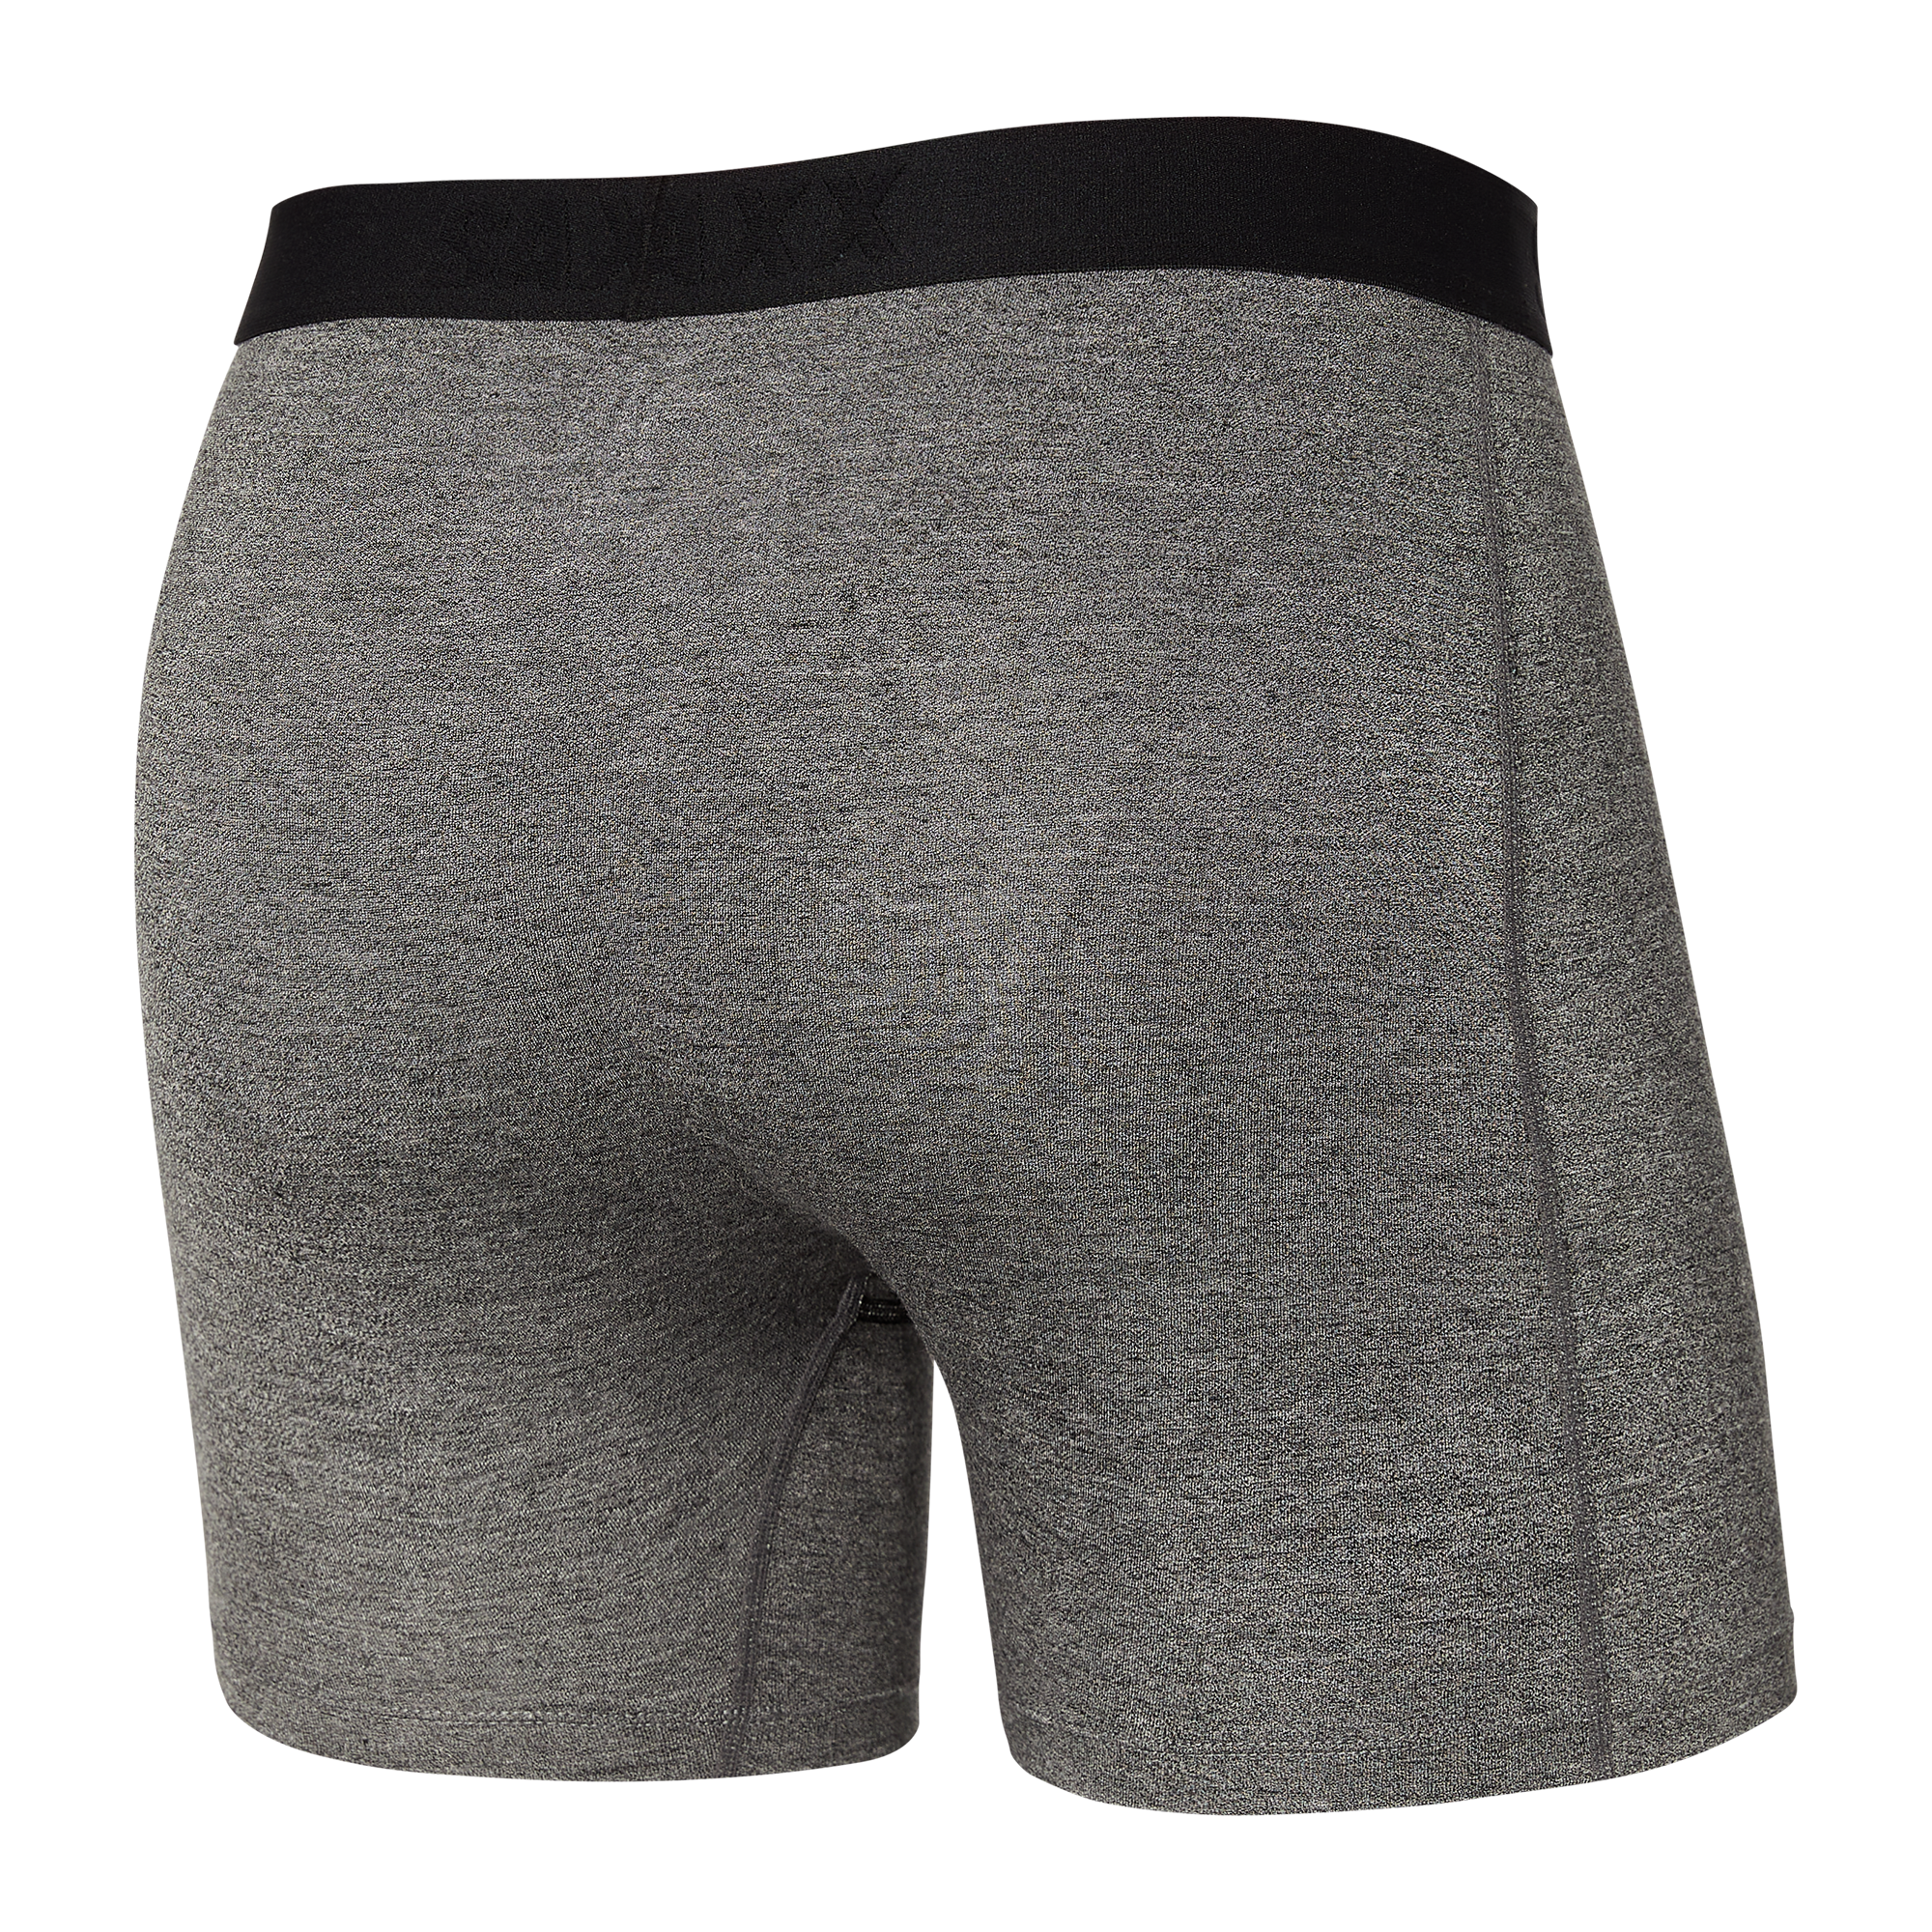 Back of Vibe Boxer Brief in Grey Heather